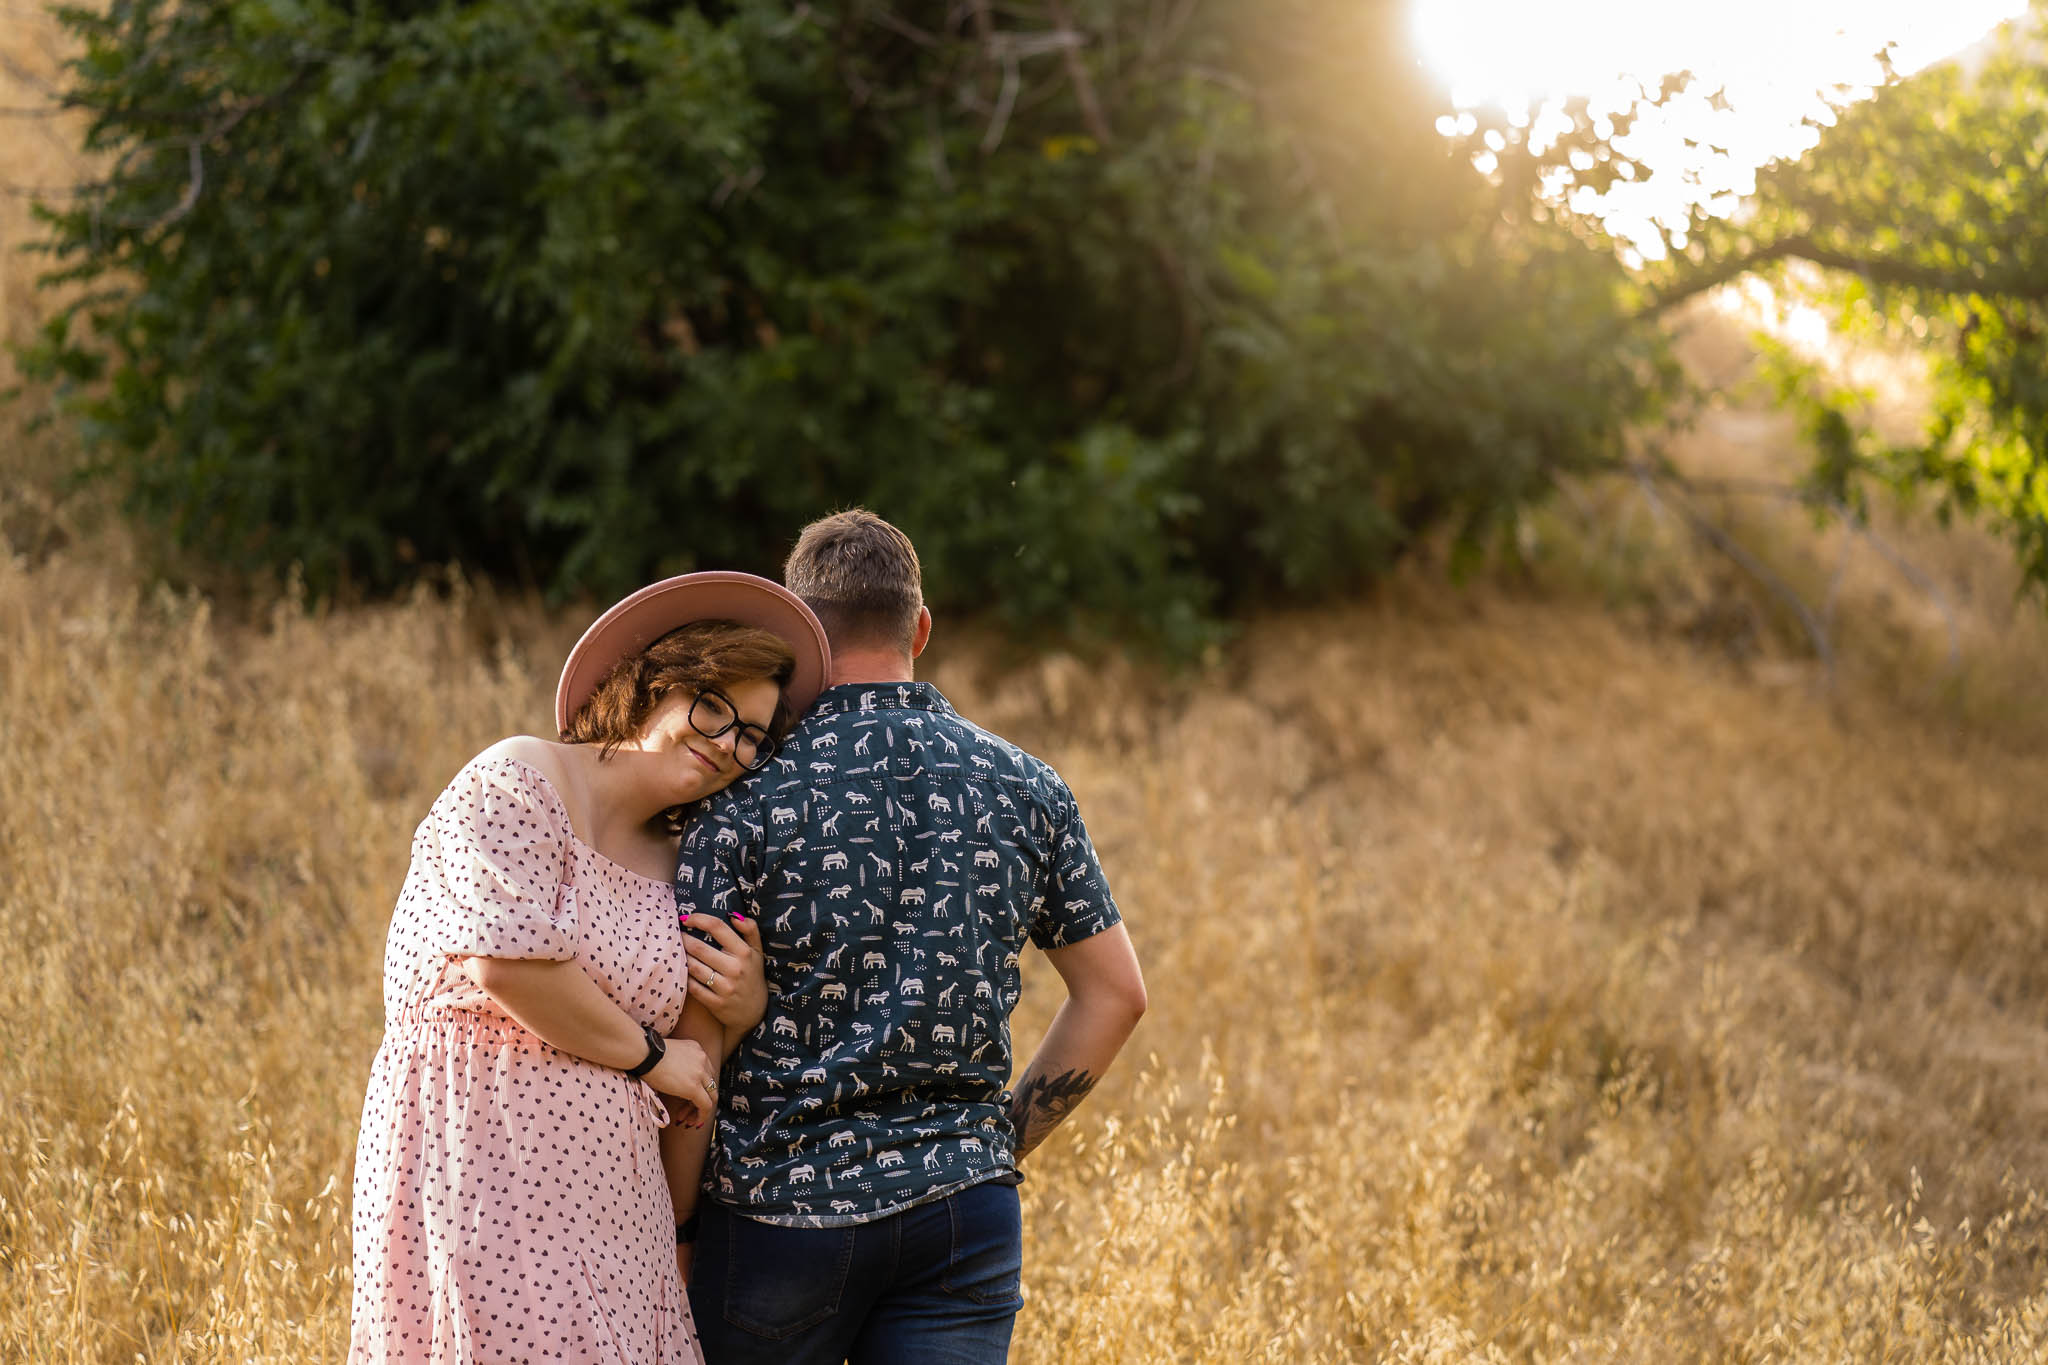 ThomasKim_photography K & S Engagement Session featuring a couple hugging in a grassy field.